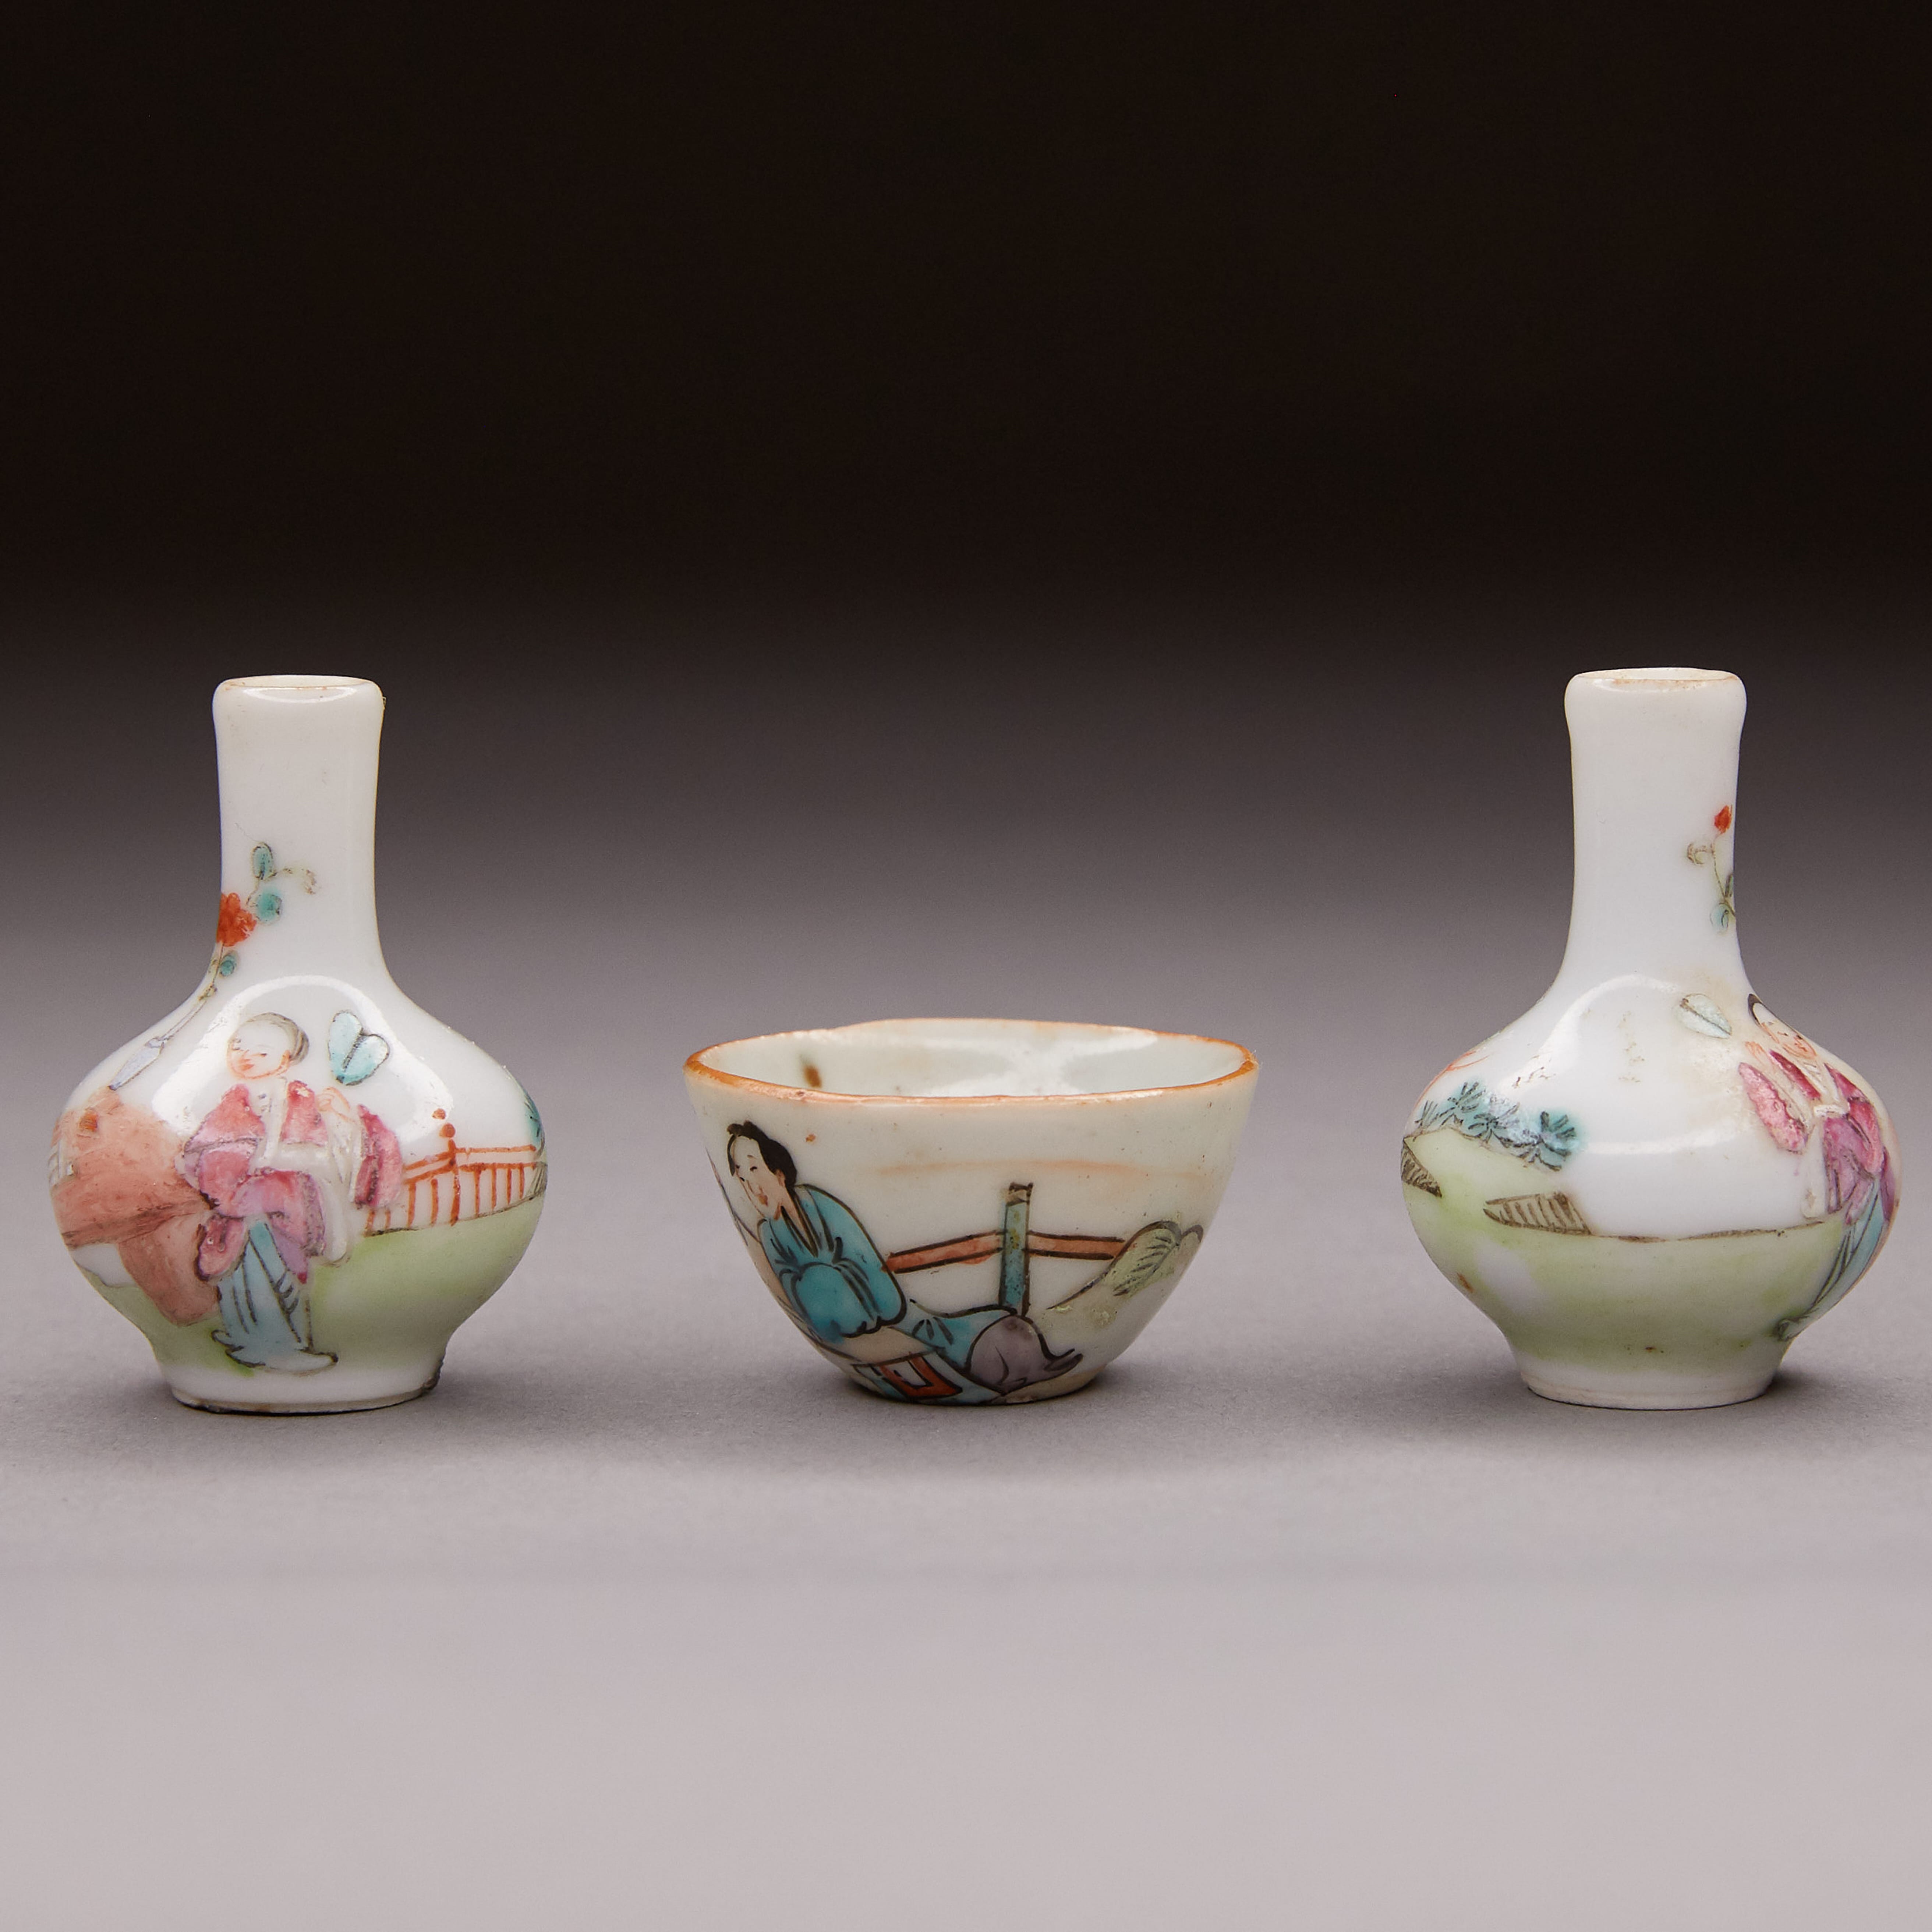 Lot 245: Grp:3 Late Qing Chinese Miniature Porcelain Objects